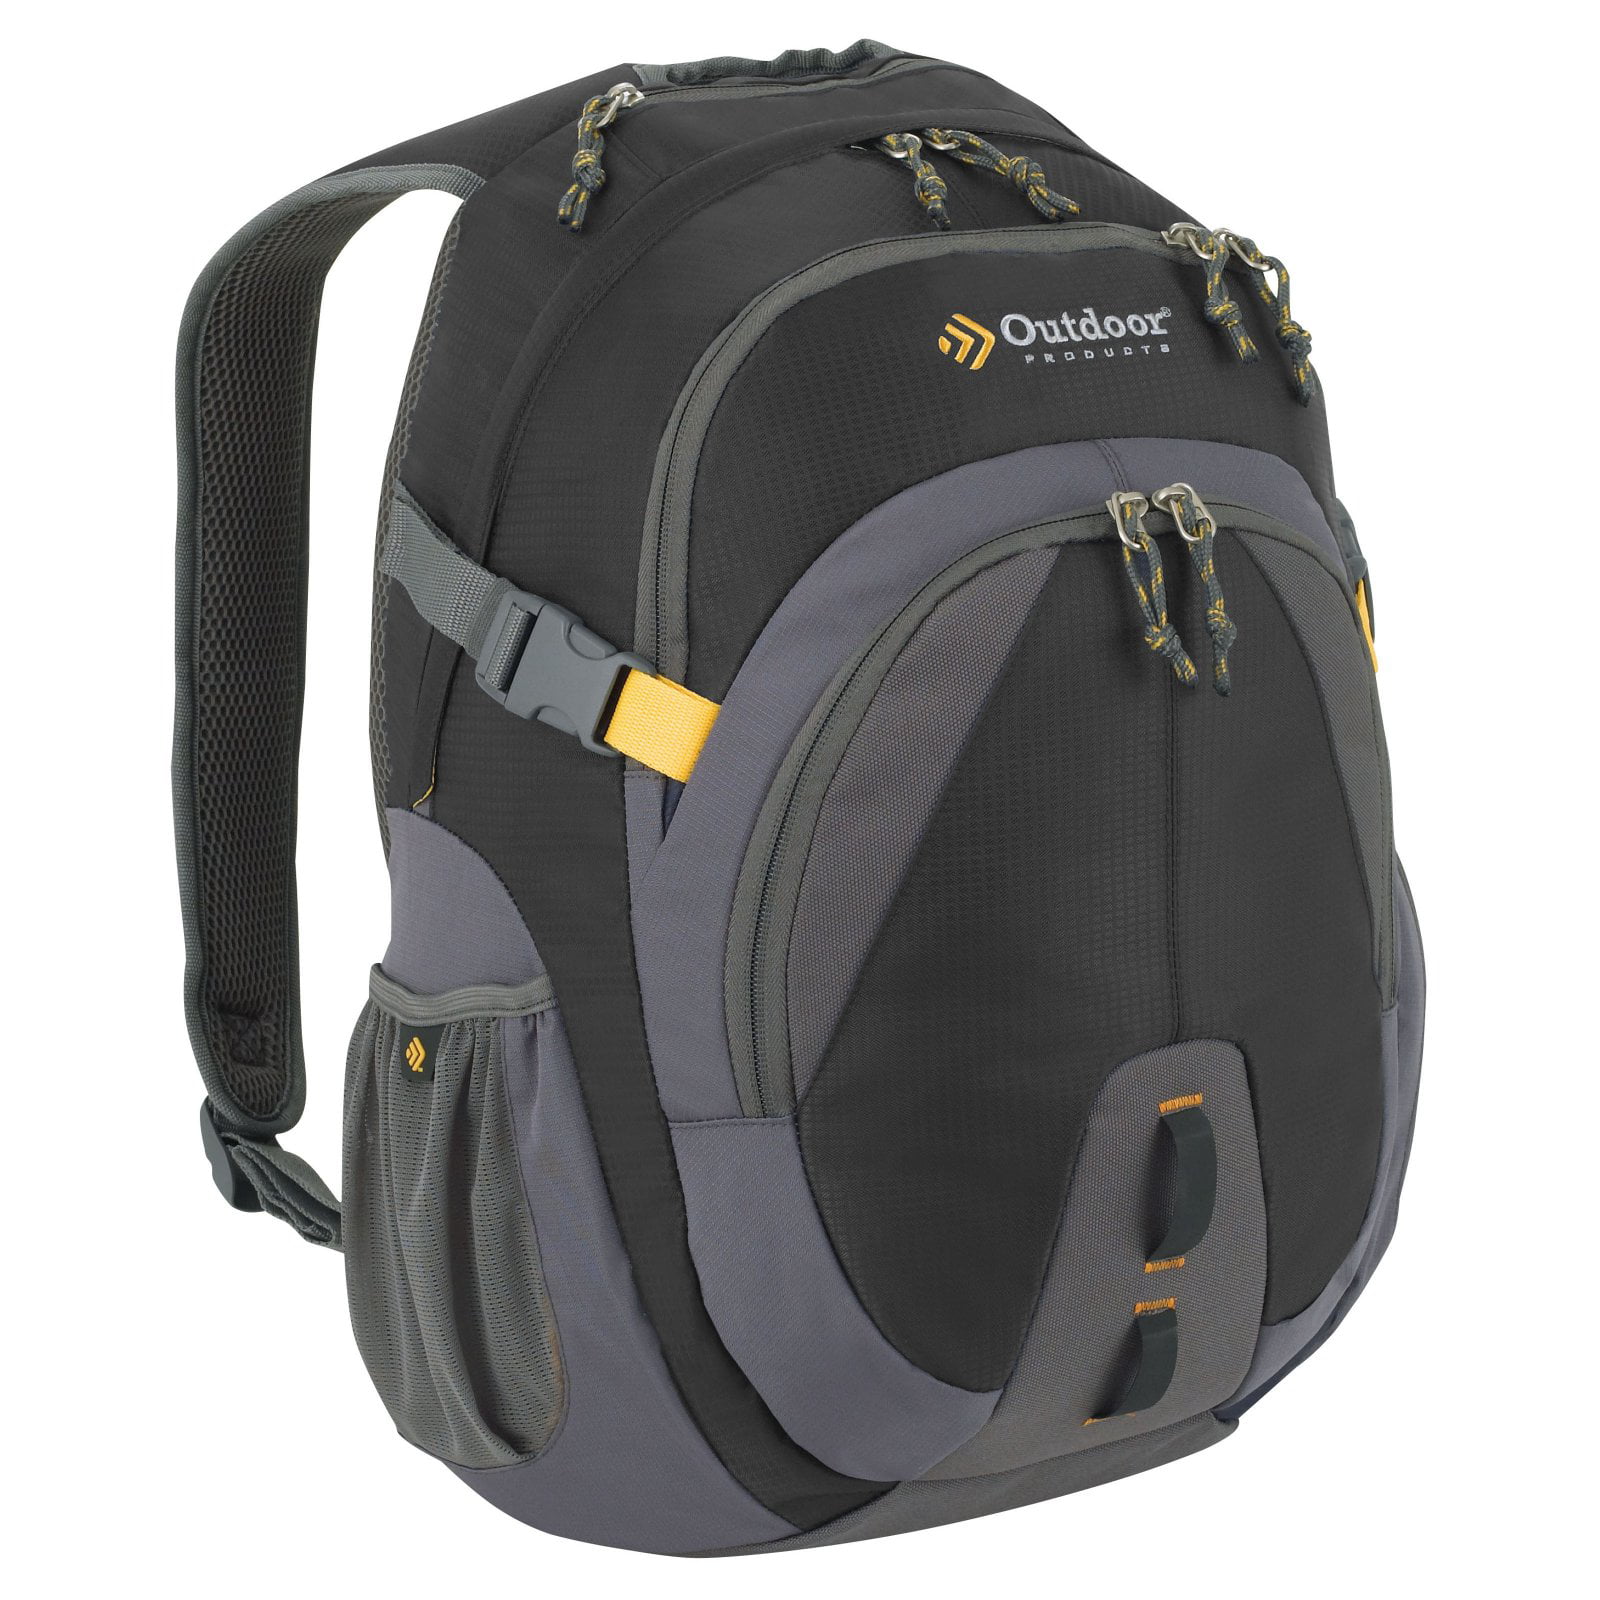 Outdoor Products - Outdoor Products Bam Backpack - Walmart.com ...